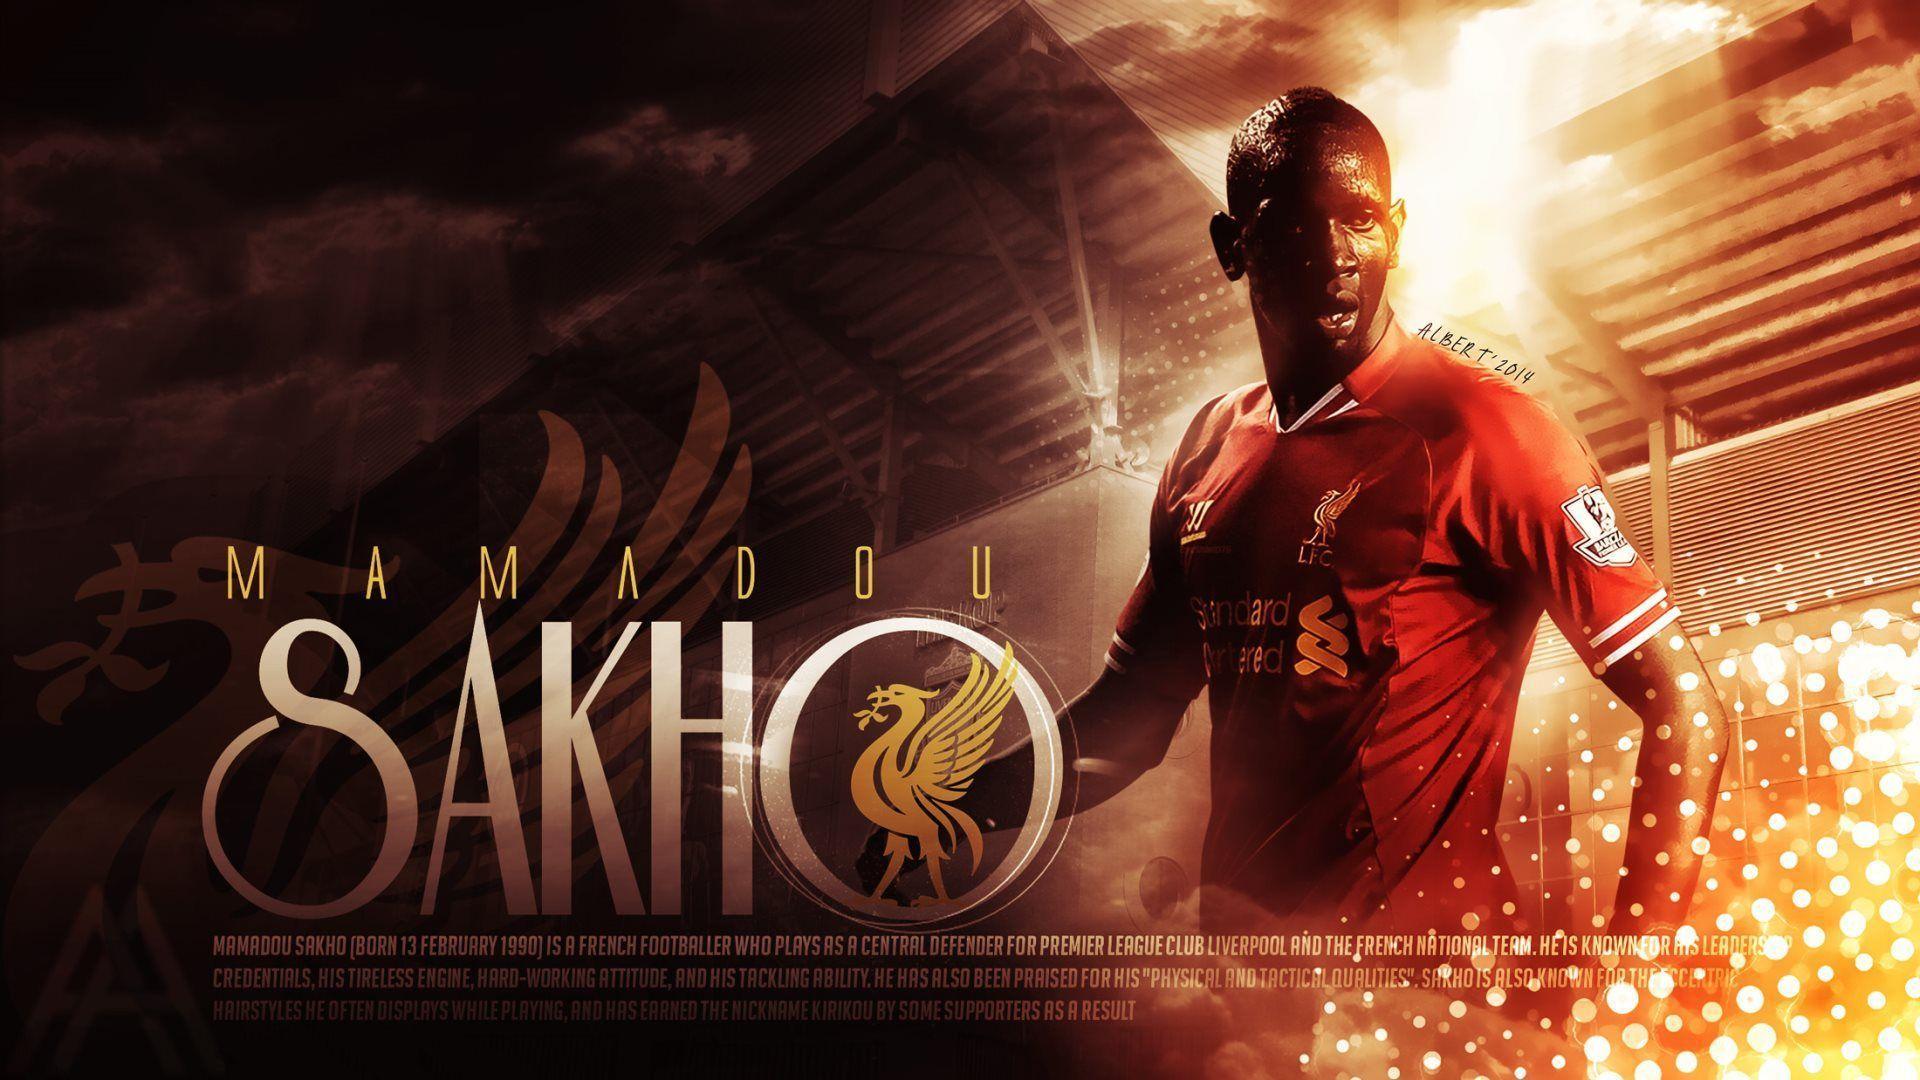 Liverpool & Manchester United Players HD Wallpaper. 4K